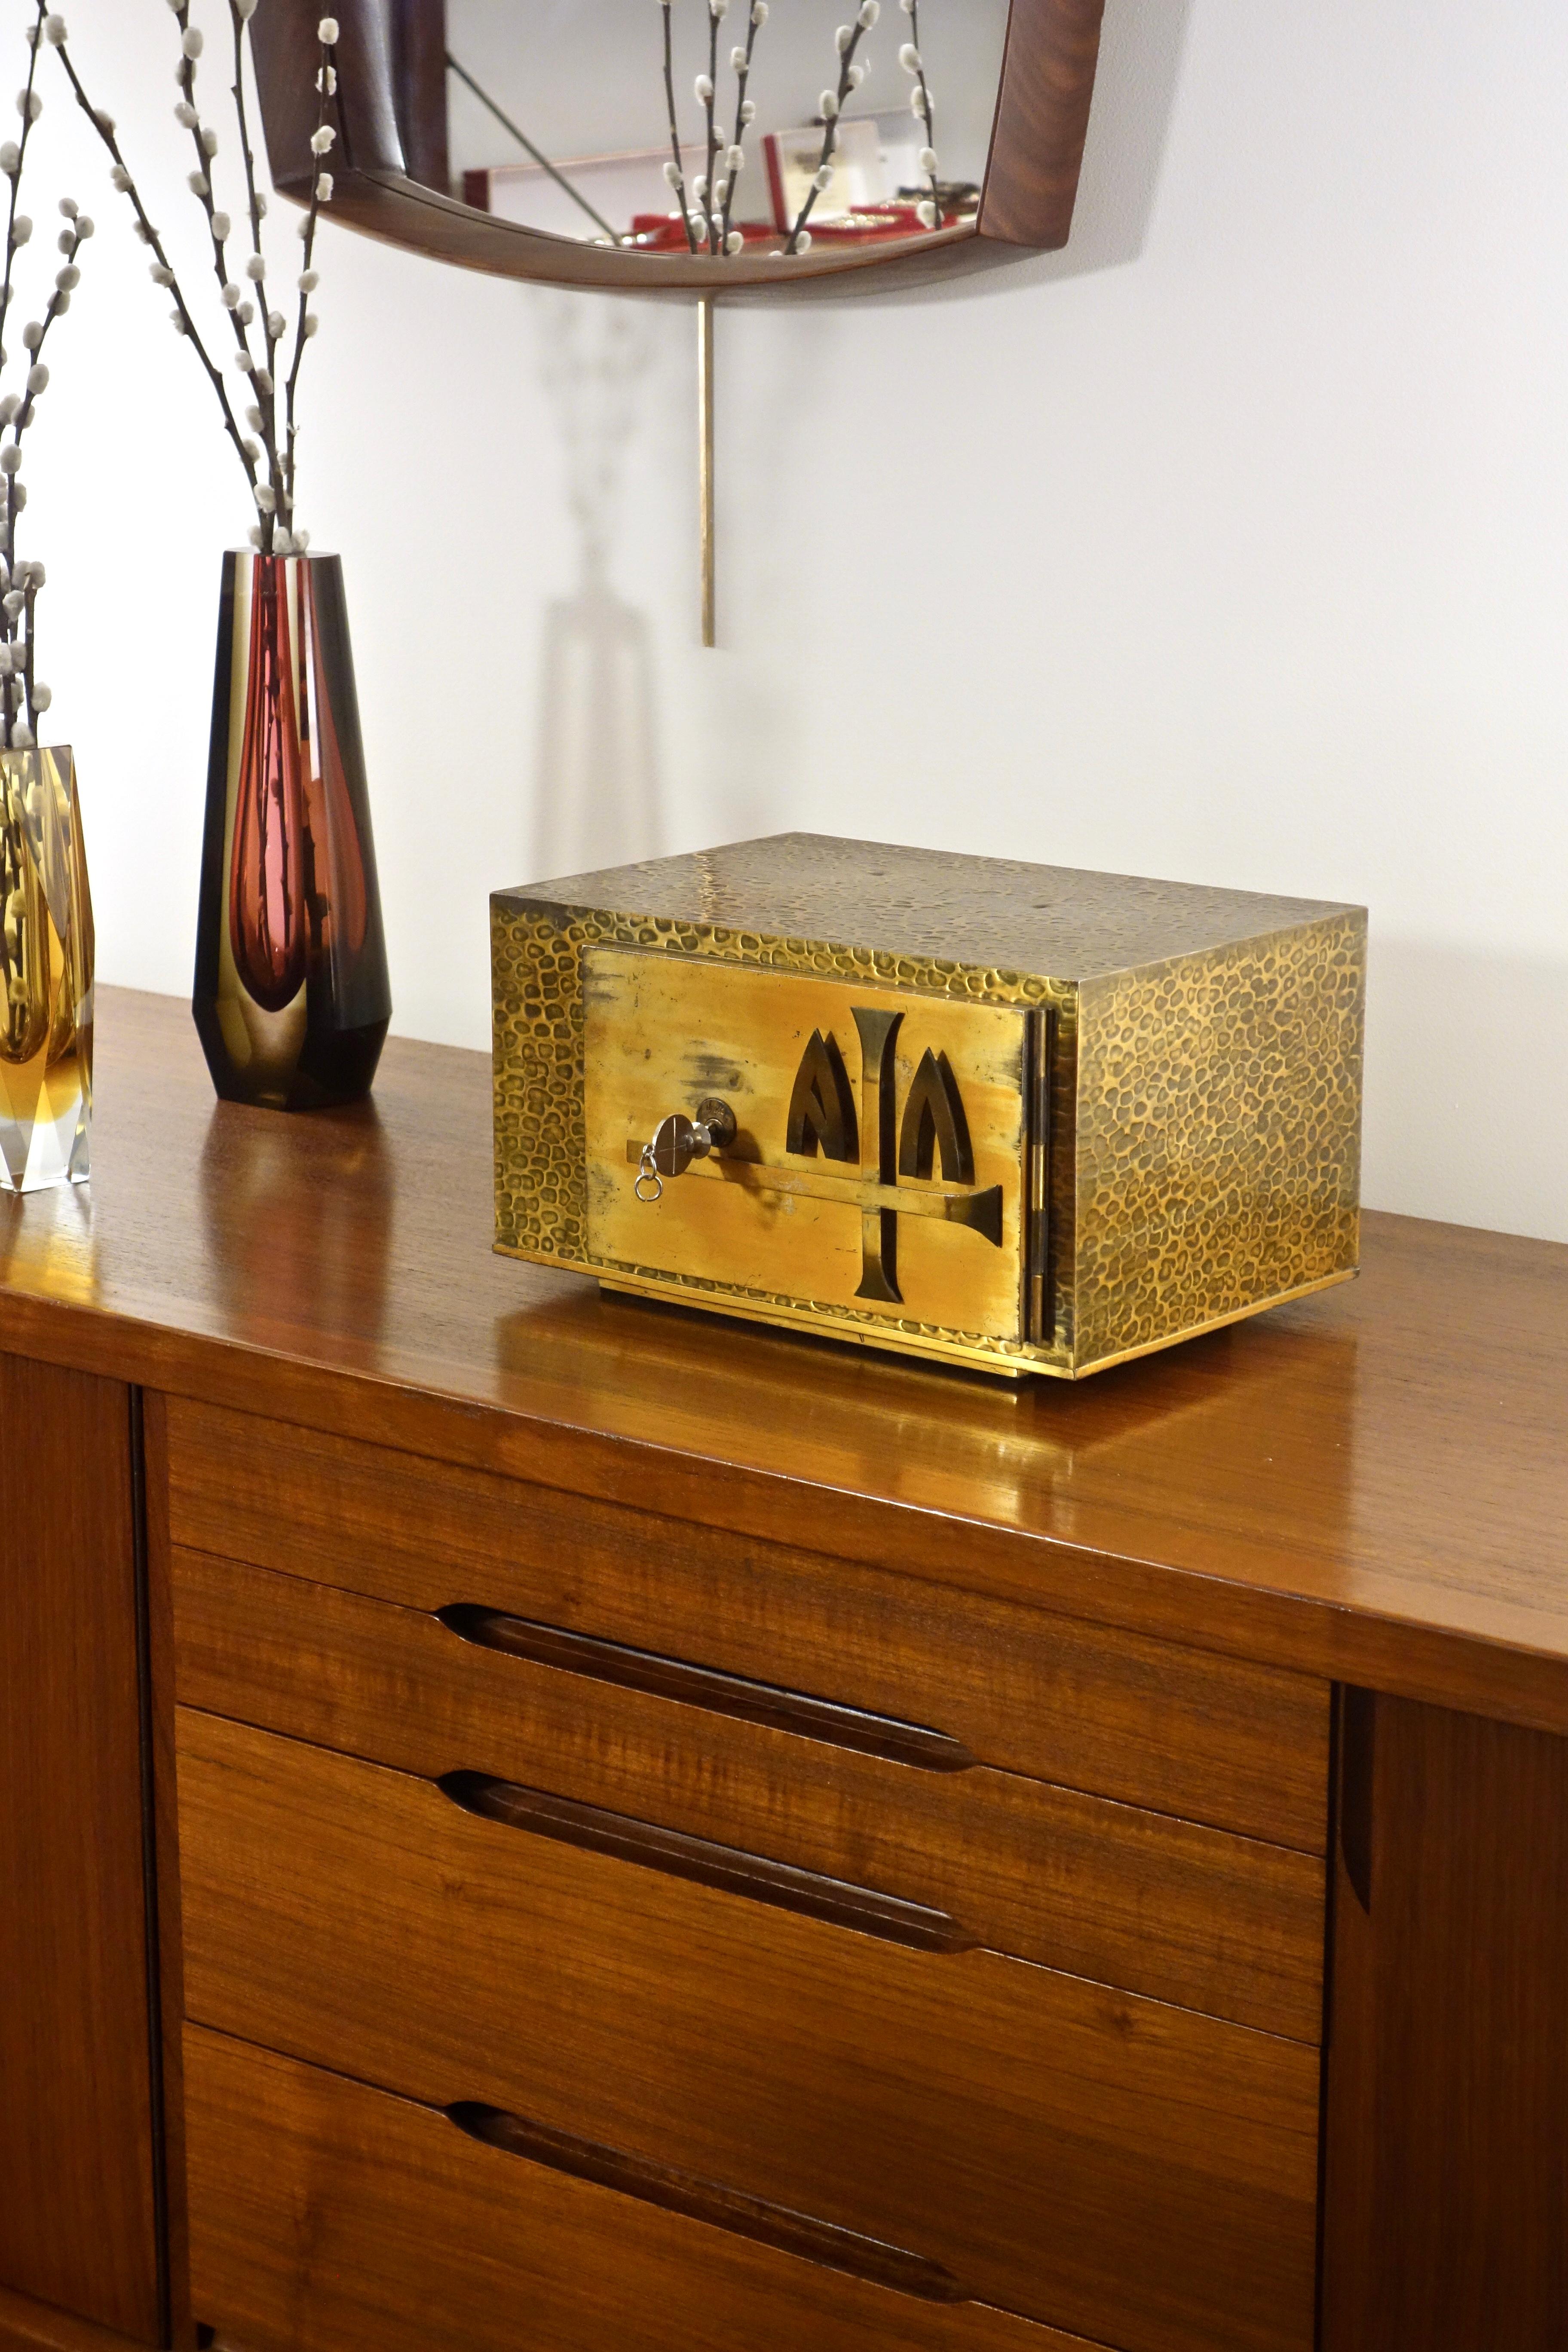 Vintage tabernacle dating from the 1970s converted into a small safe. Handmade by the Spanish company Molina, specialized in the manufacture of religious objects. Rectangular shape in hammered copper for the exterior and textured brass for the